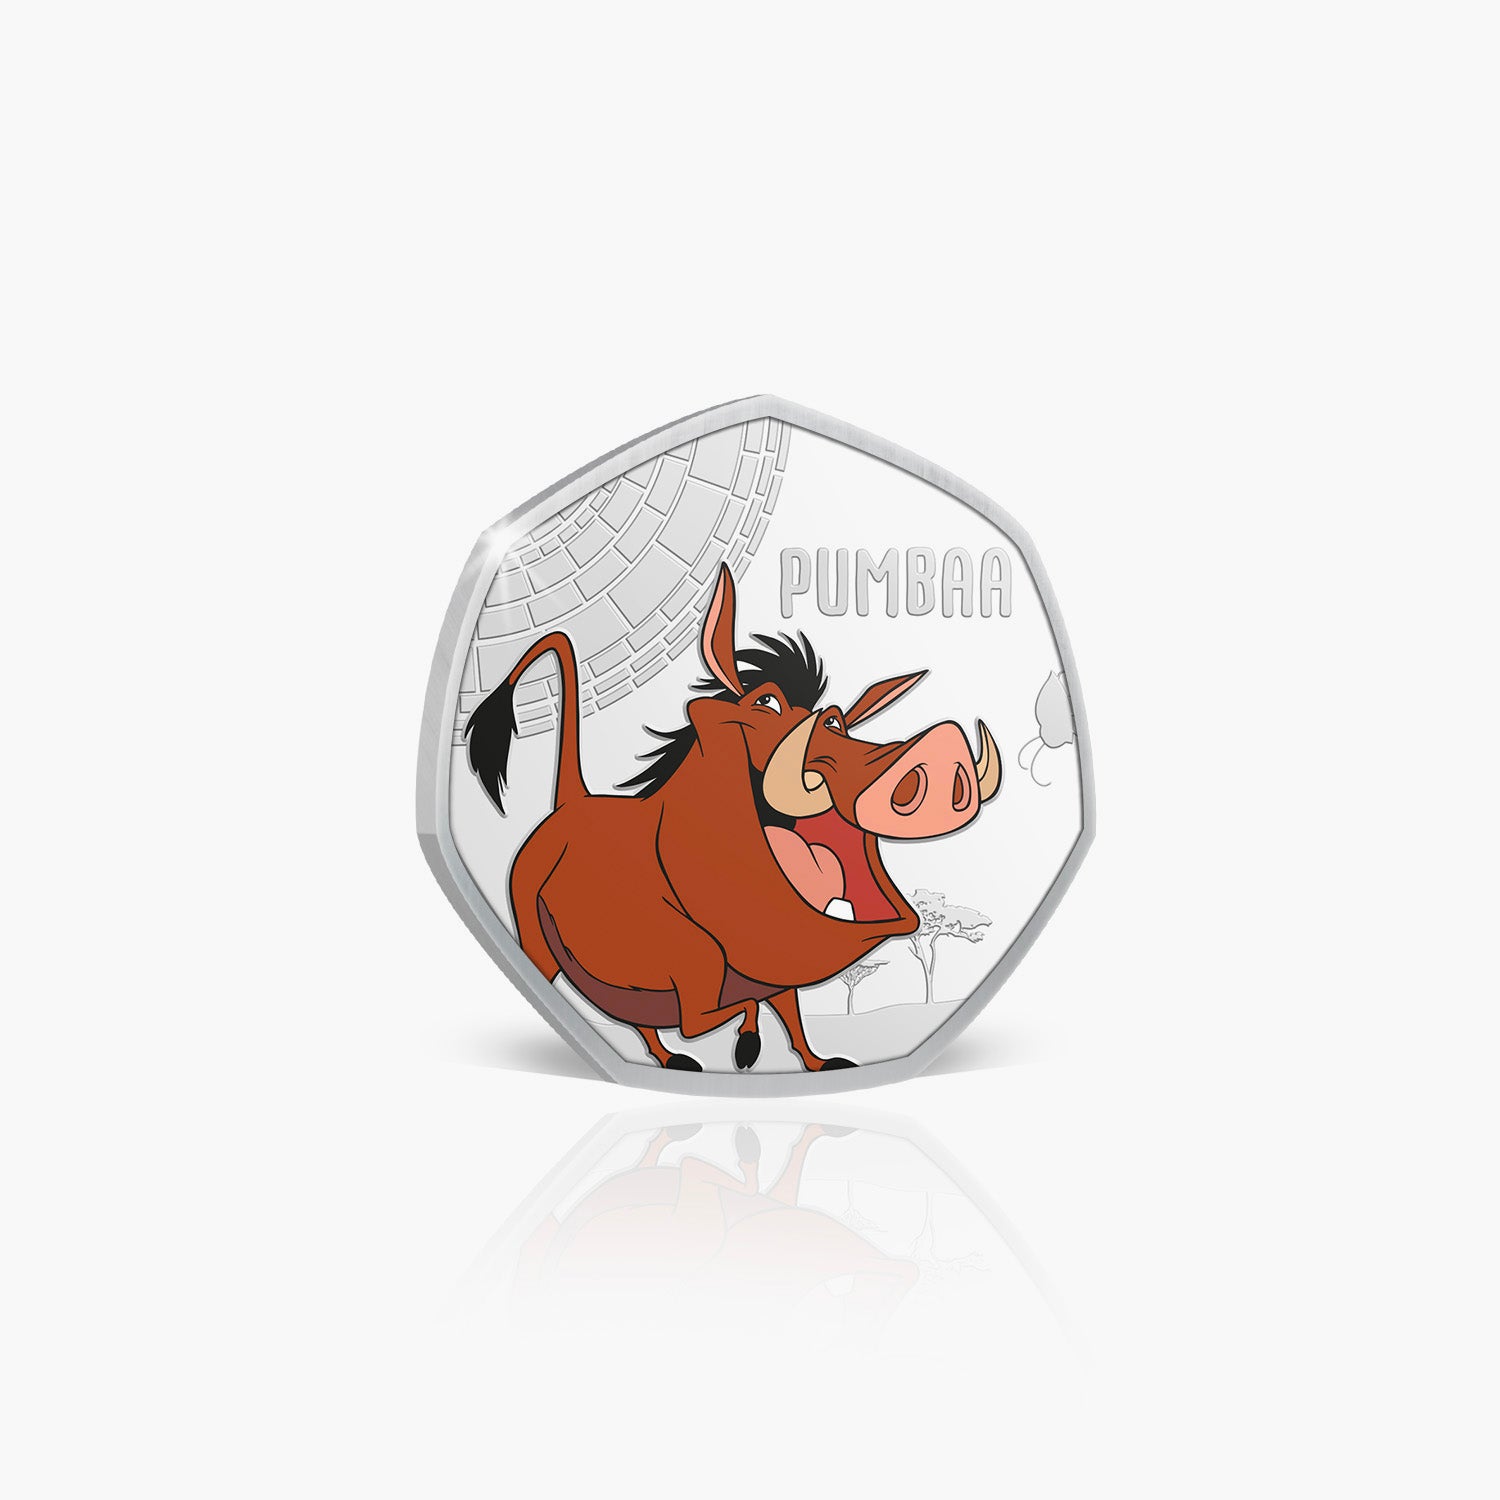 Pumbaa Silver-Plated Commemorative